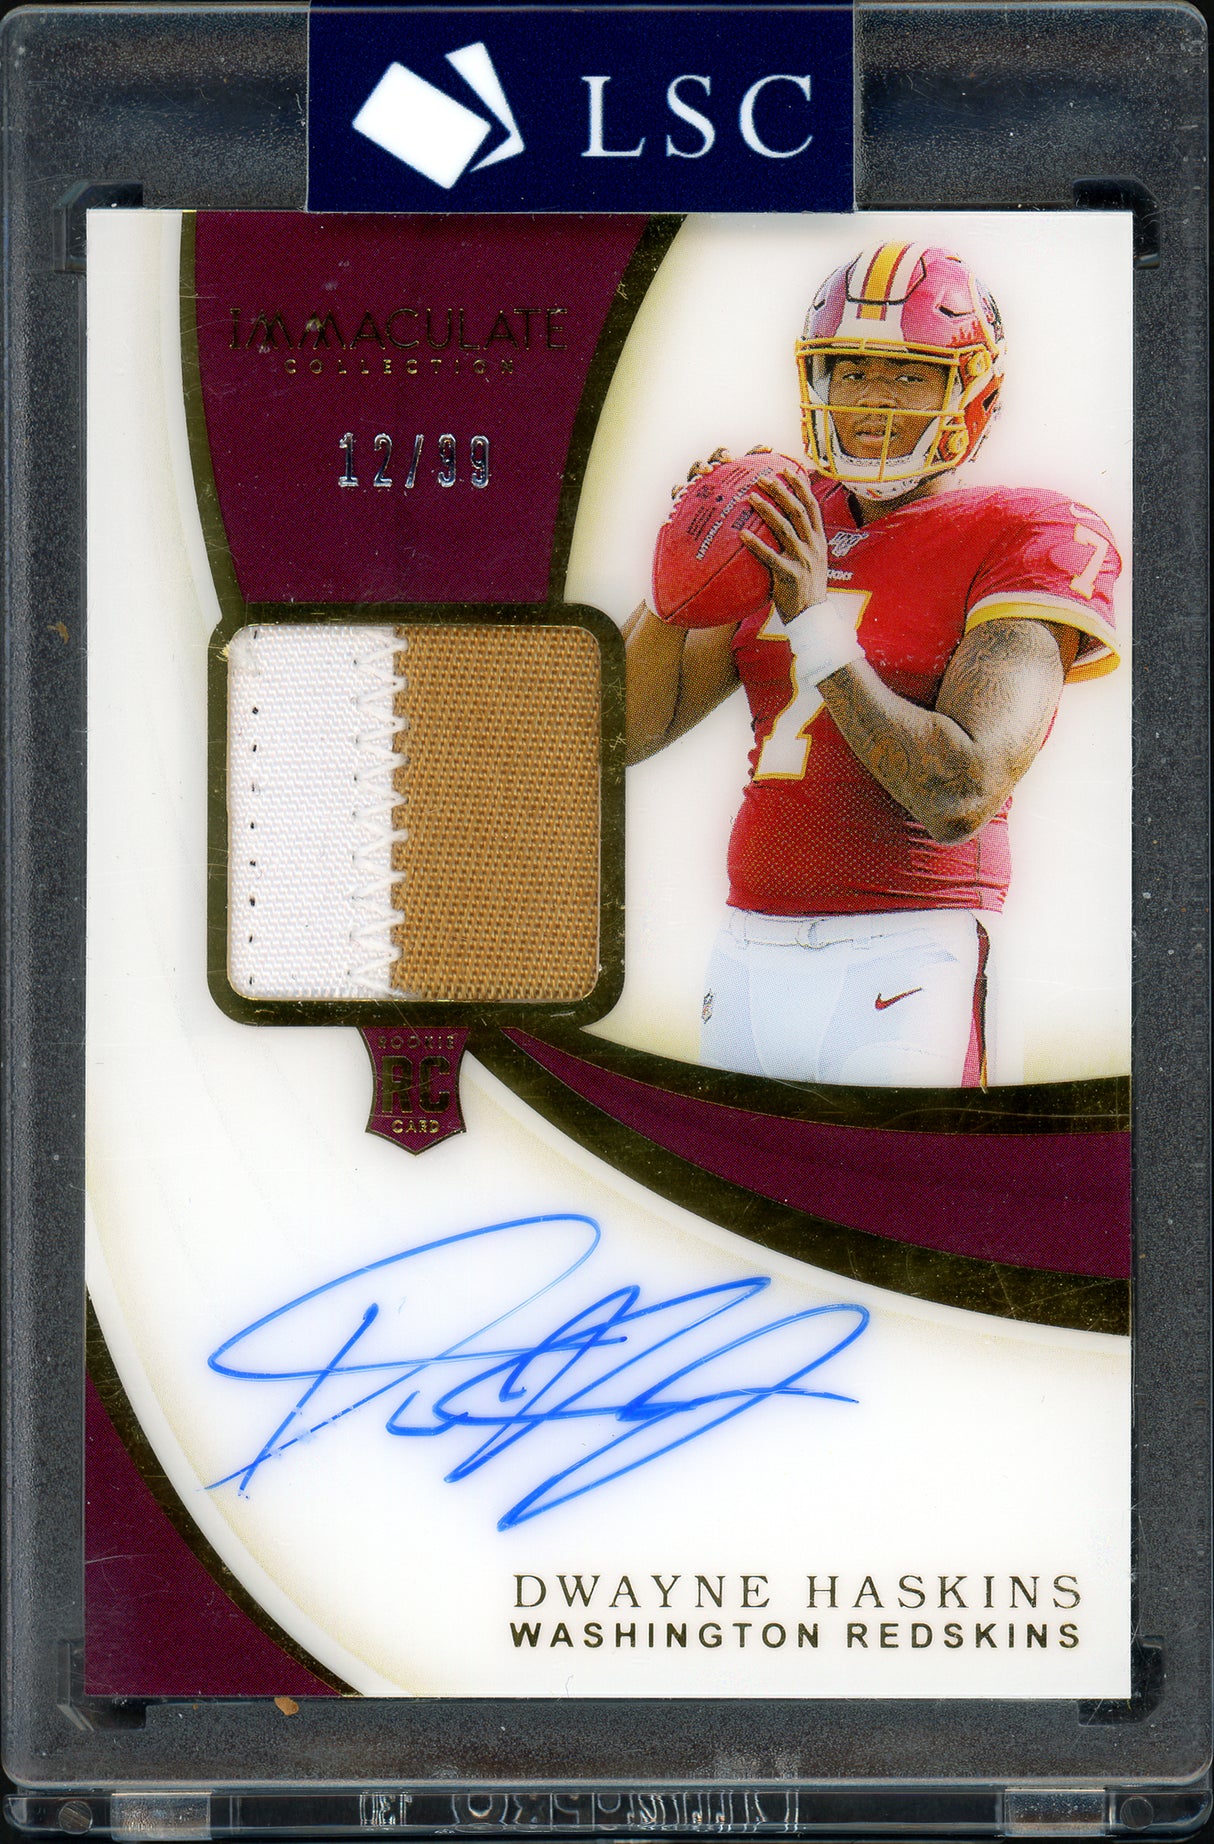 Dwayne Haskins Autographed 2019 Panini Immaculate Collection Rookie Card #101 Washington Redskins Jersey Patch #12/99 SKU #162350